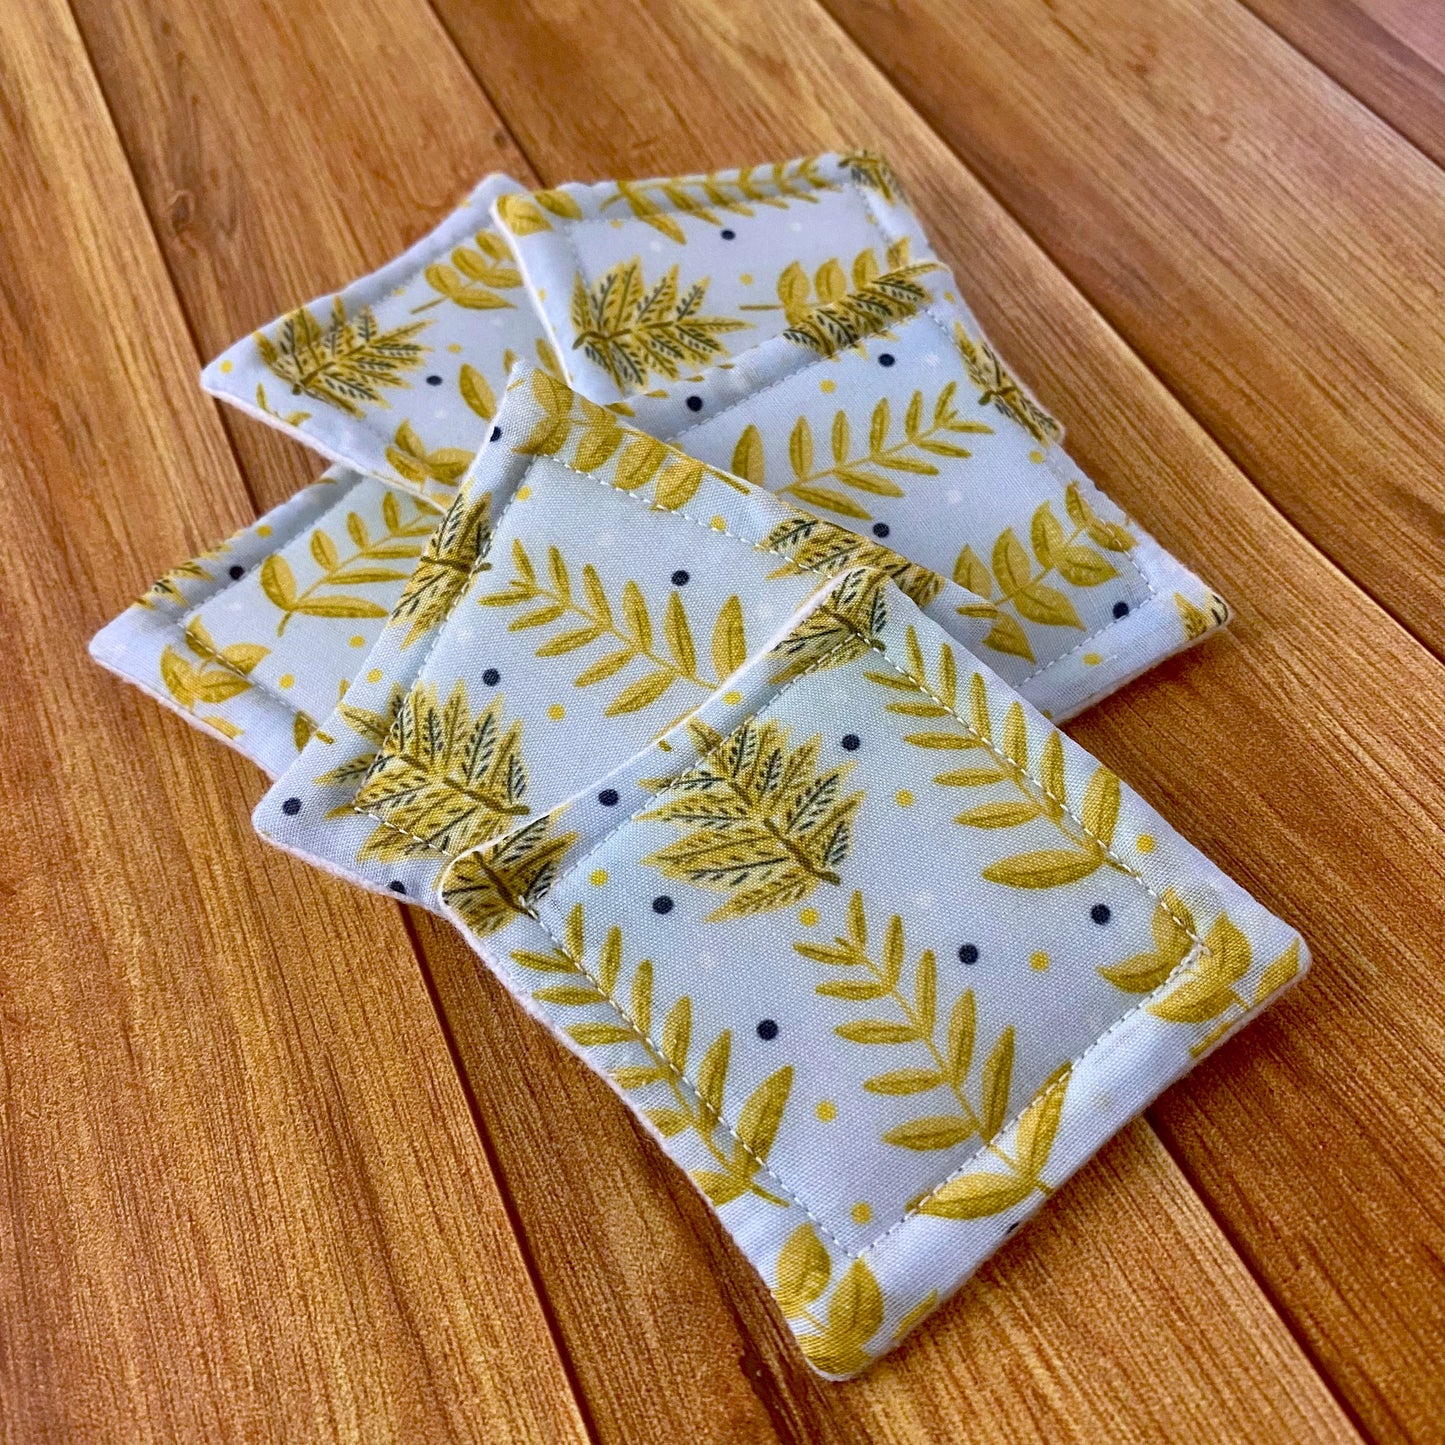 reusable skincare pads on wooden surface